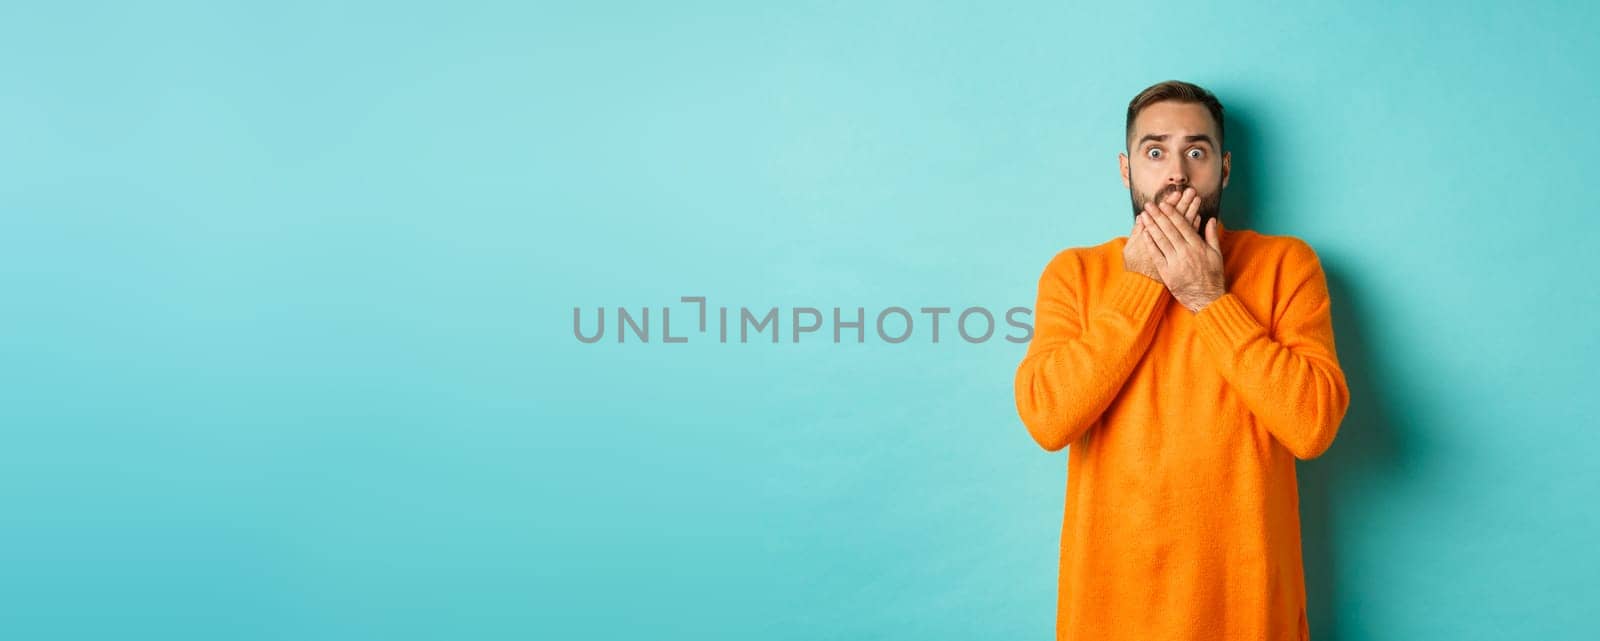 Startled man looking at horrible scene, gasping and stare scared, standing in orange winter sweater, studio background.